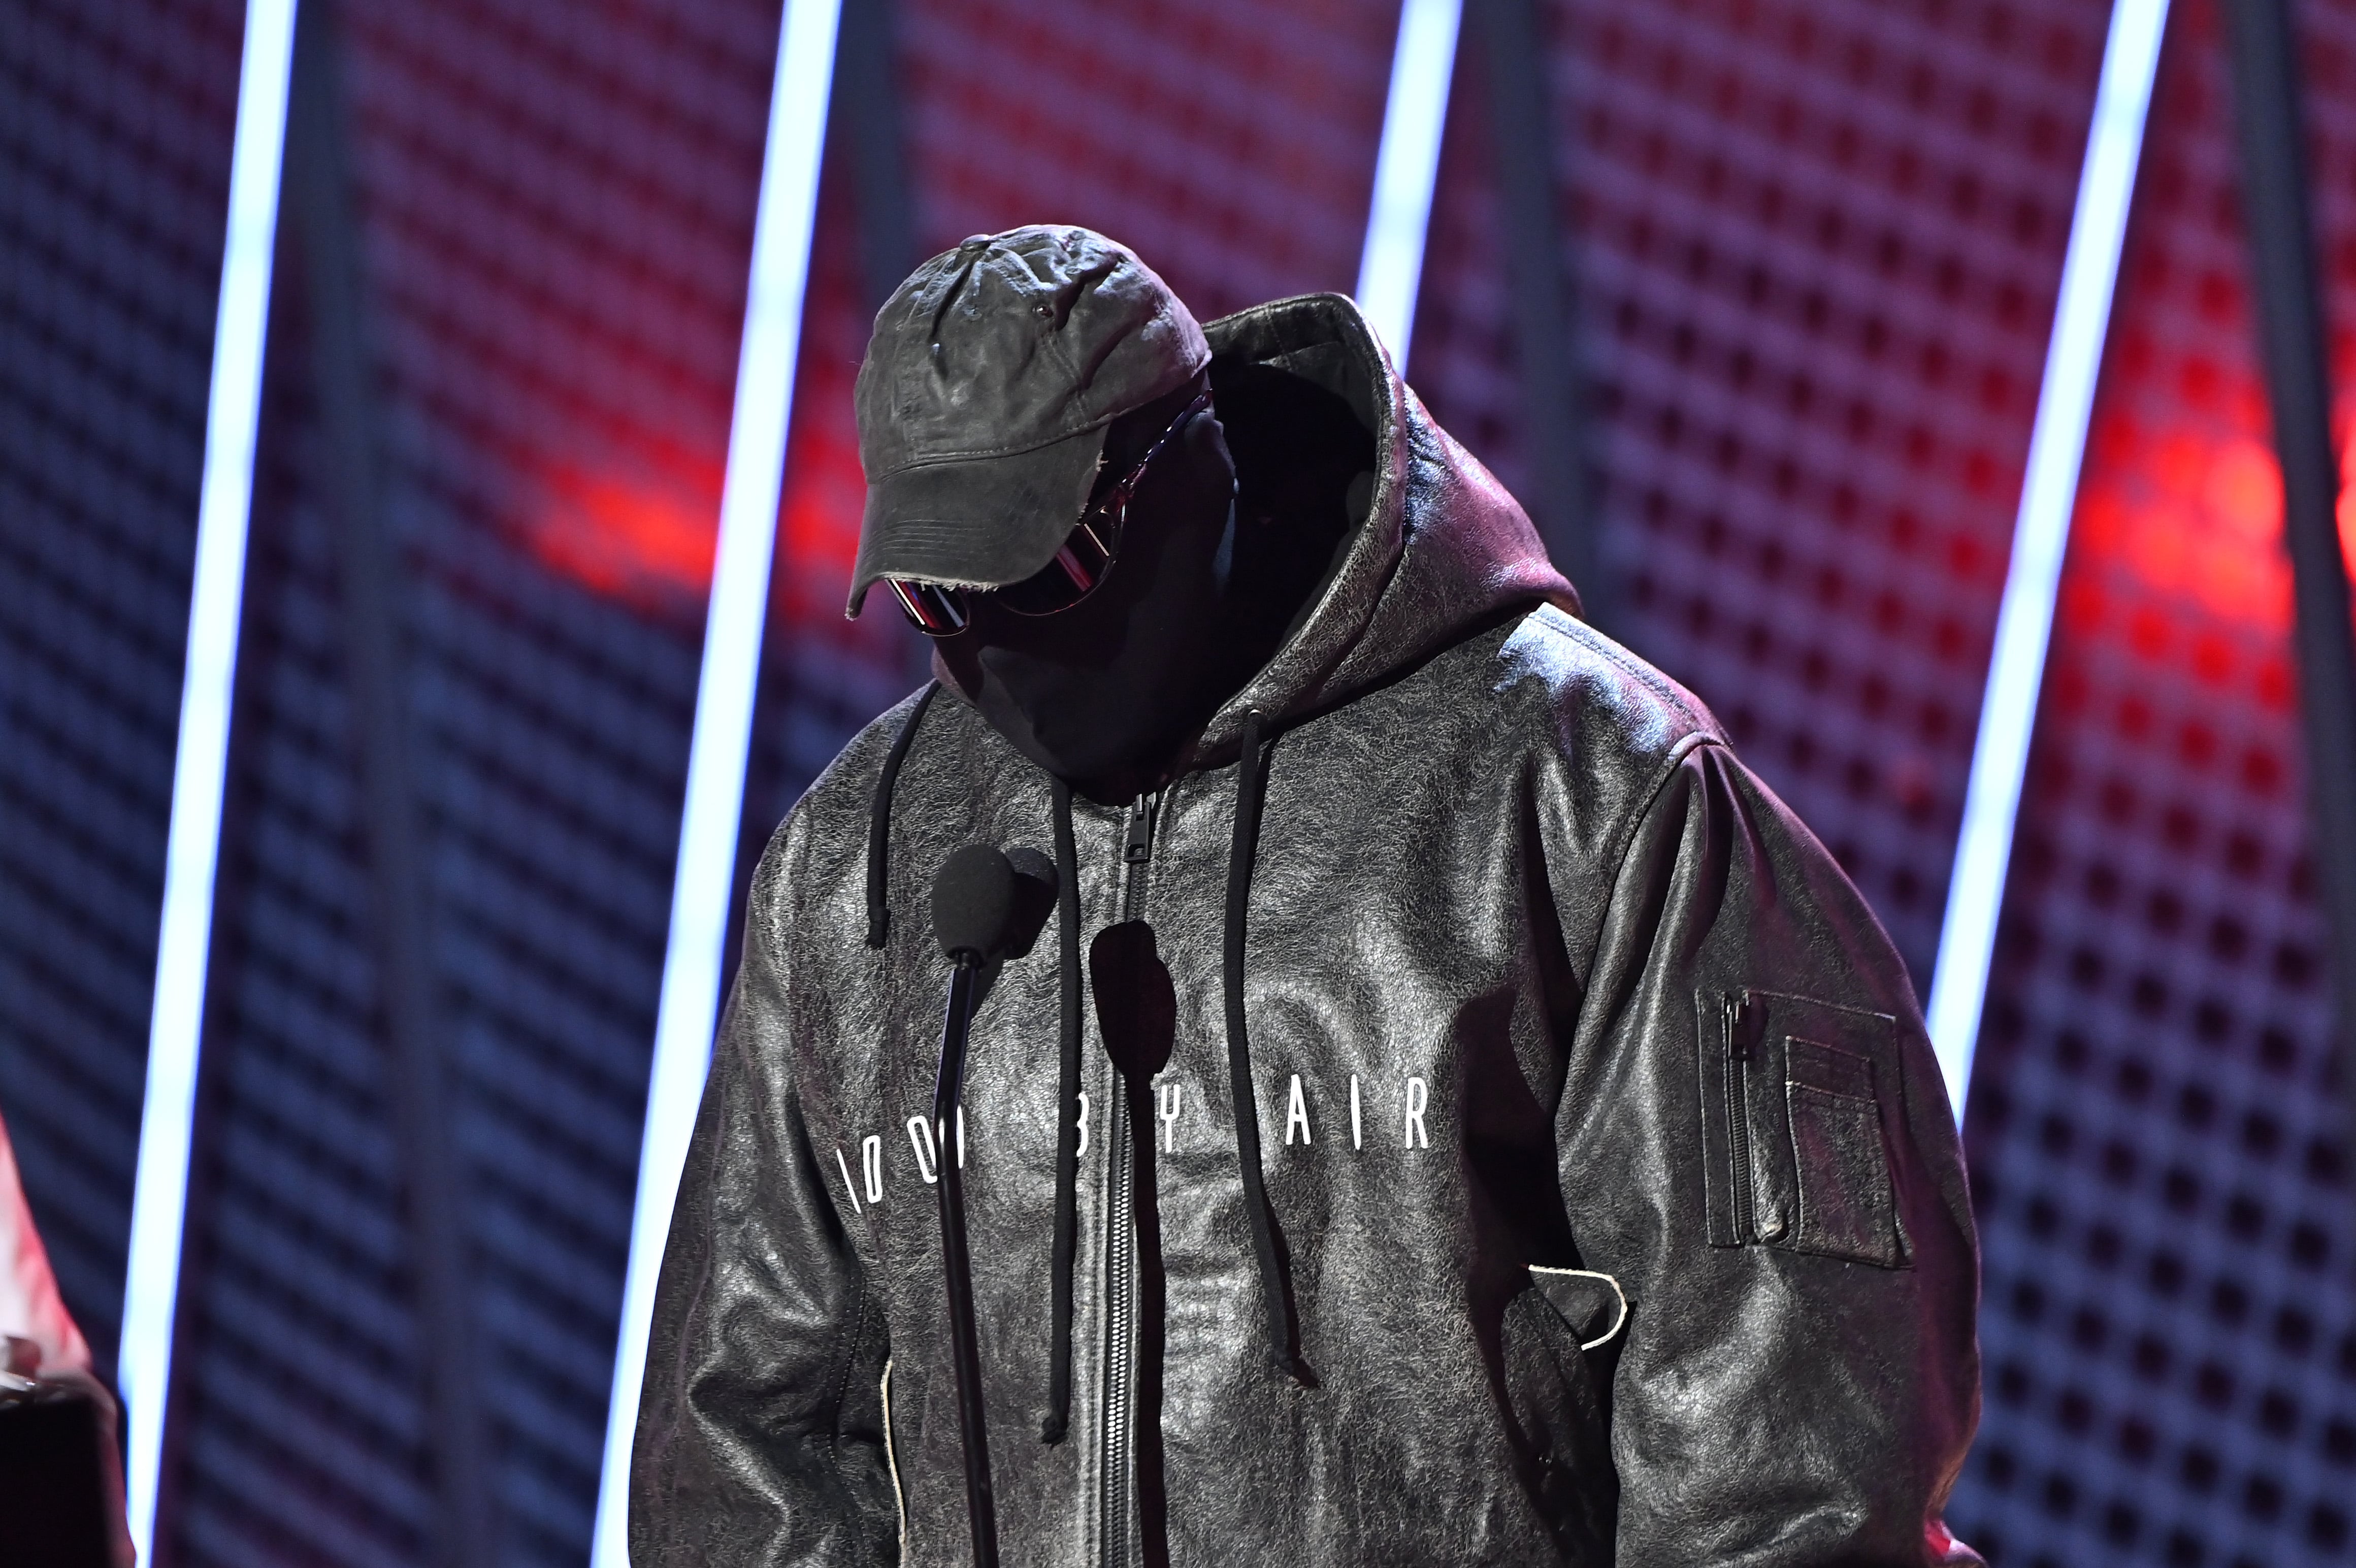 Kanye West confuses fans with face mask at BET Awards 2022